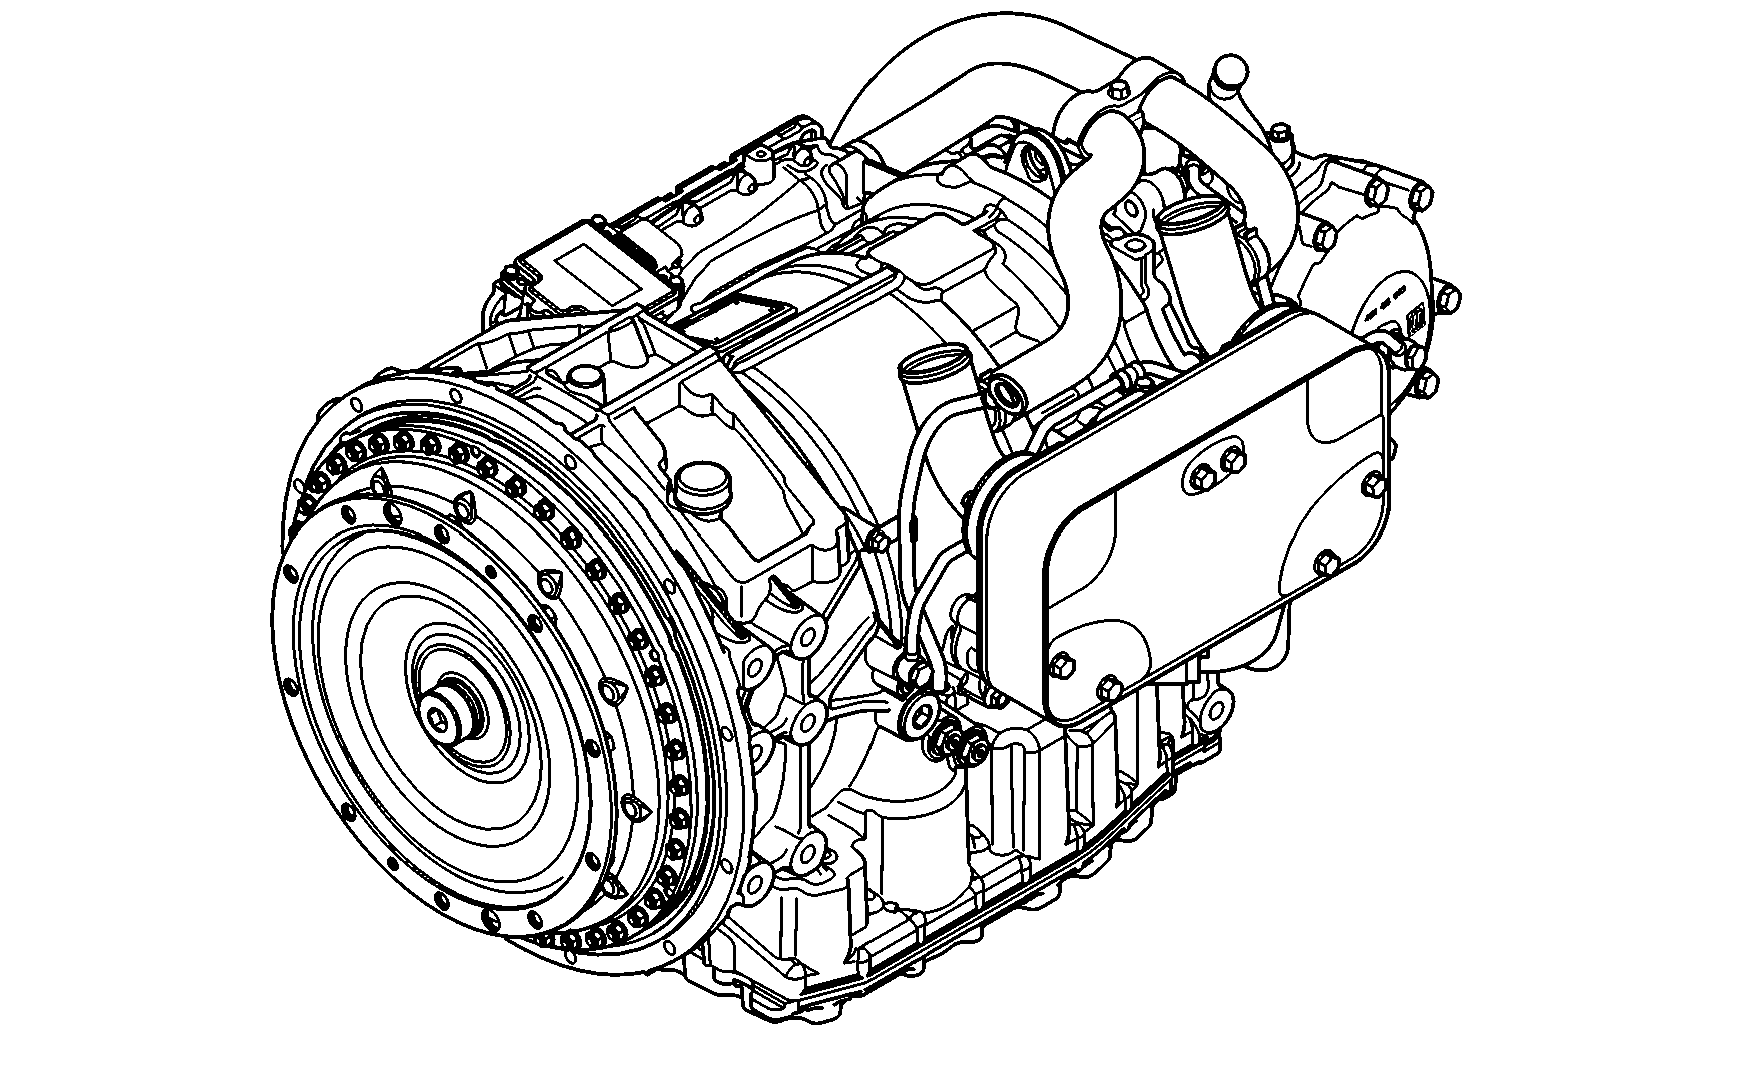 drawing for DENNIS SPECIAL VEHICLES 662871 - 6 AP 1203 B (figure 1)